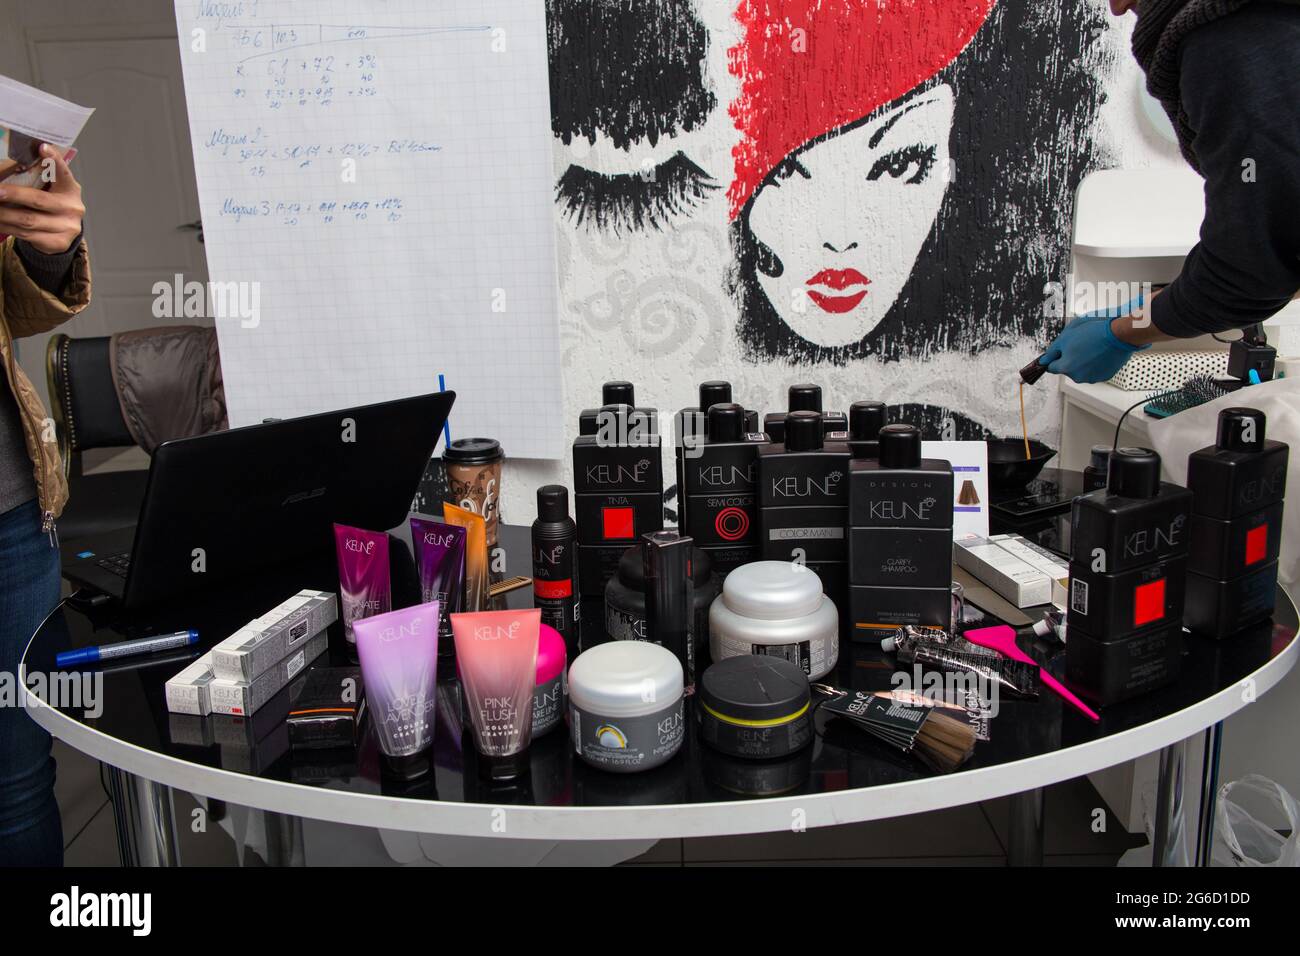 Grodno, Belarus - October 20, 2016: A table with KEUNE HAIRCOSMETICS product line. A Dutch brand of professional cosmetics for hair care. Cosmetics we Stock Photo